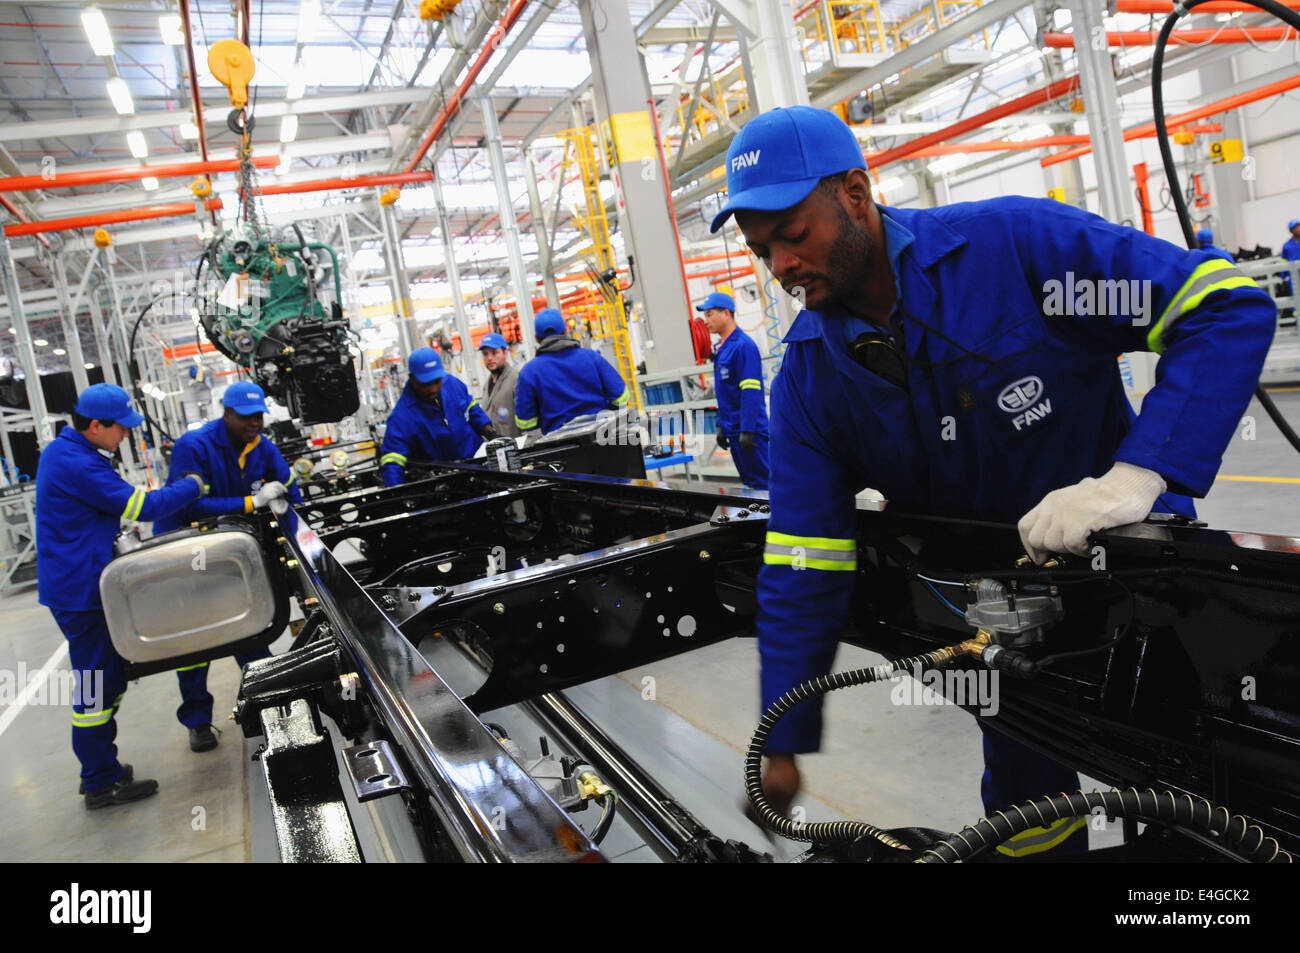 Nelson Mandela, South Africa. 10th July, 2014. Workers work in new assembly production plant of China First Automotive Works (FAW) Group Corporation in Nelson Mandela Bay Municipality, South Africa, July 10, 2014. China FAW Group Corporation launched its new assembly production plant in COEGA Industrial Development Zone (IDZ) in the Nelson Mandela Bay Municipality on Thursday. The plant, with an investment of 57 million dollars will initially assemble 5,000 trucks annually for the Sub-Saharan African market. © Zhang Chuanshi/Xinhua/Alamy Live News Stock Photo